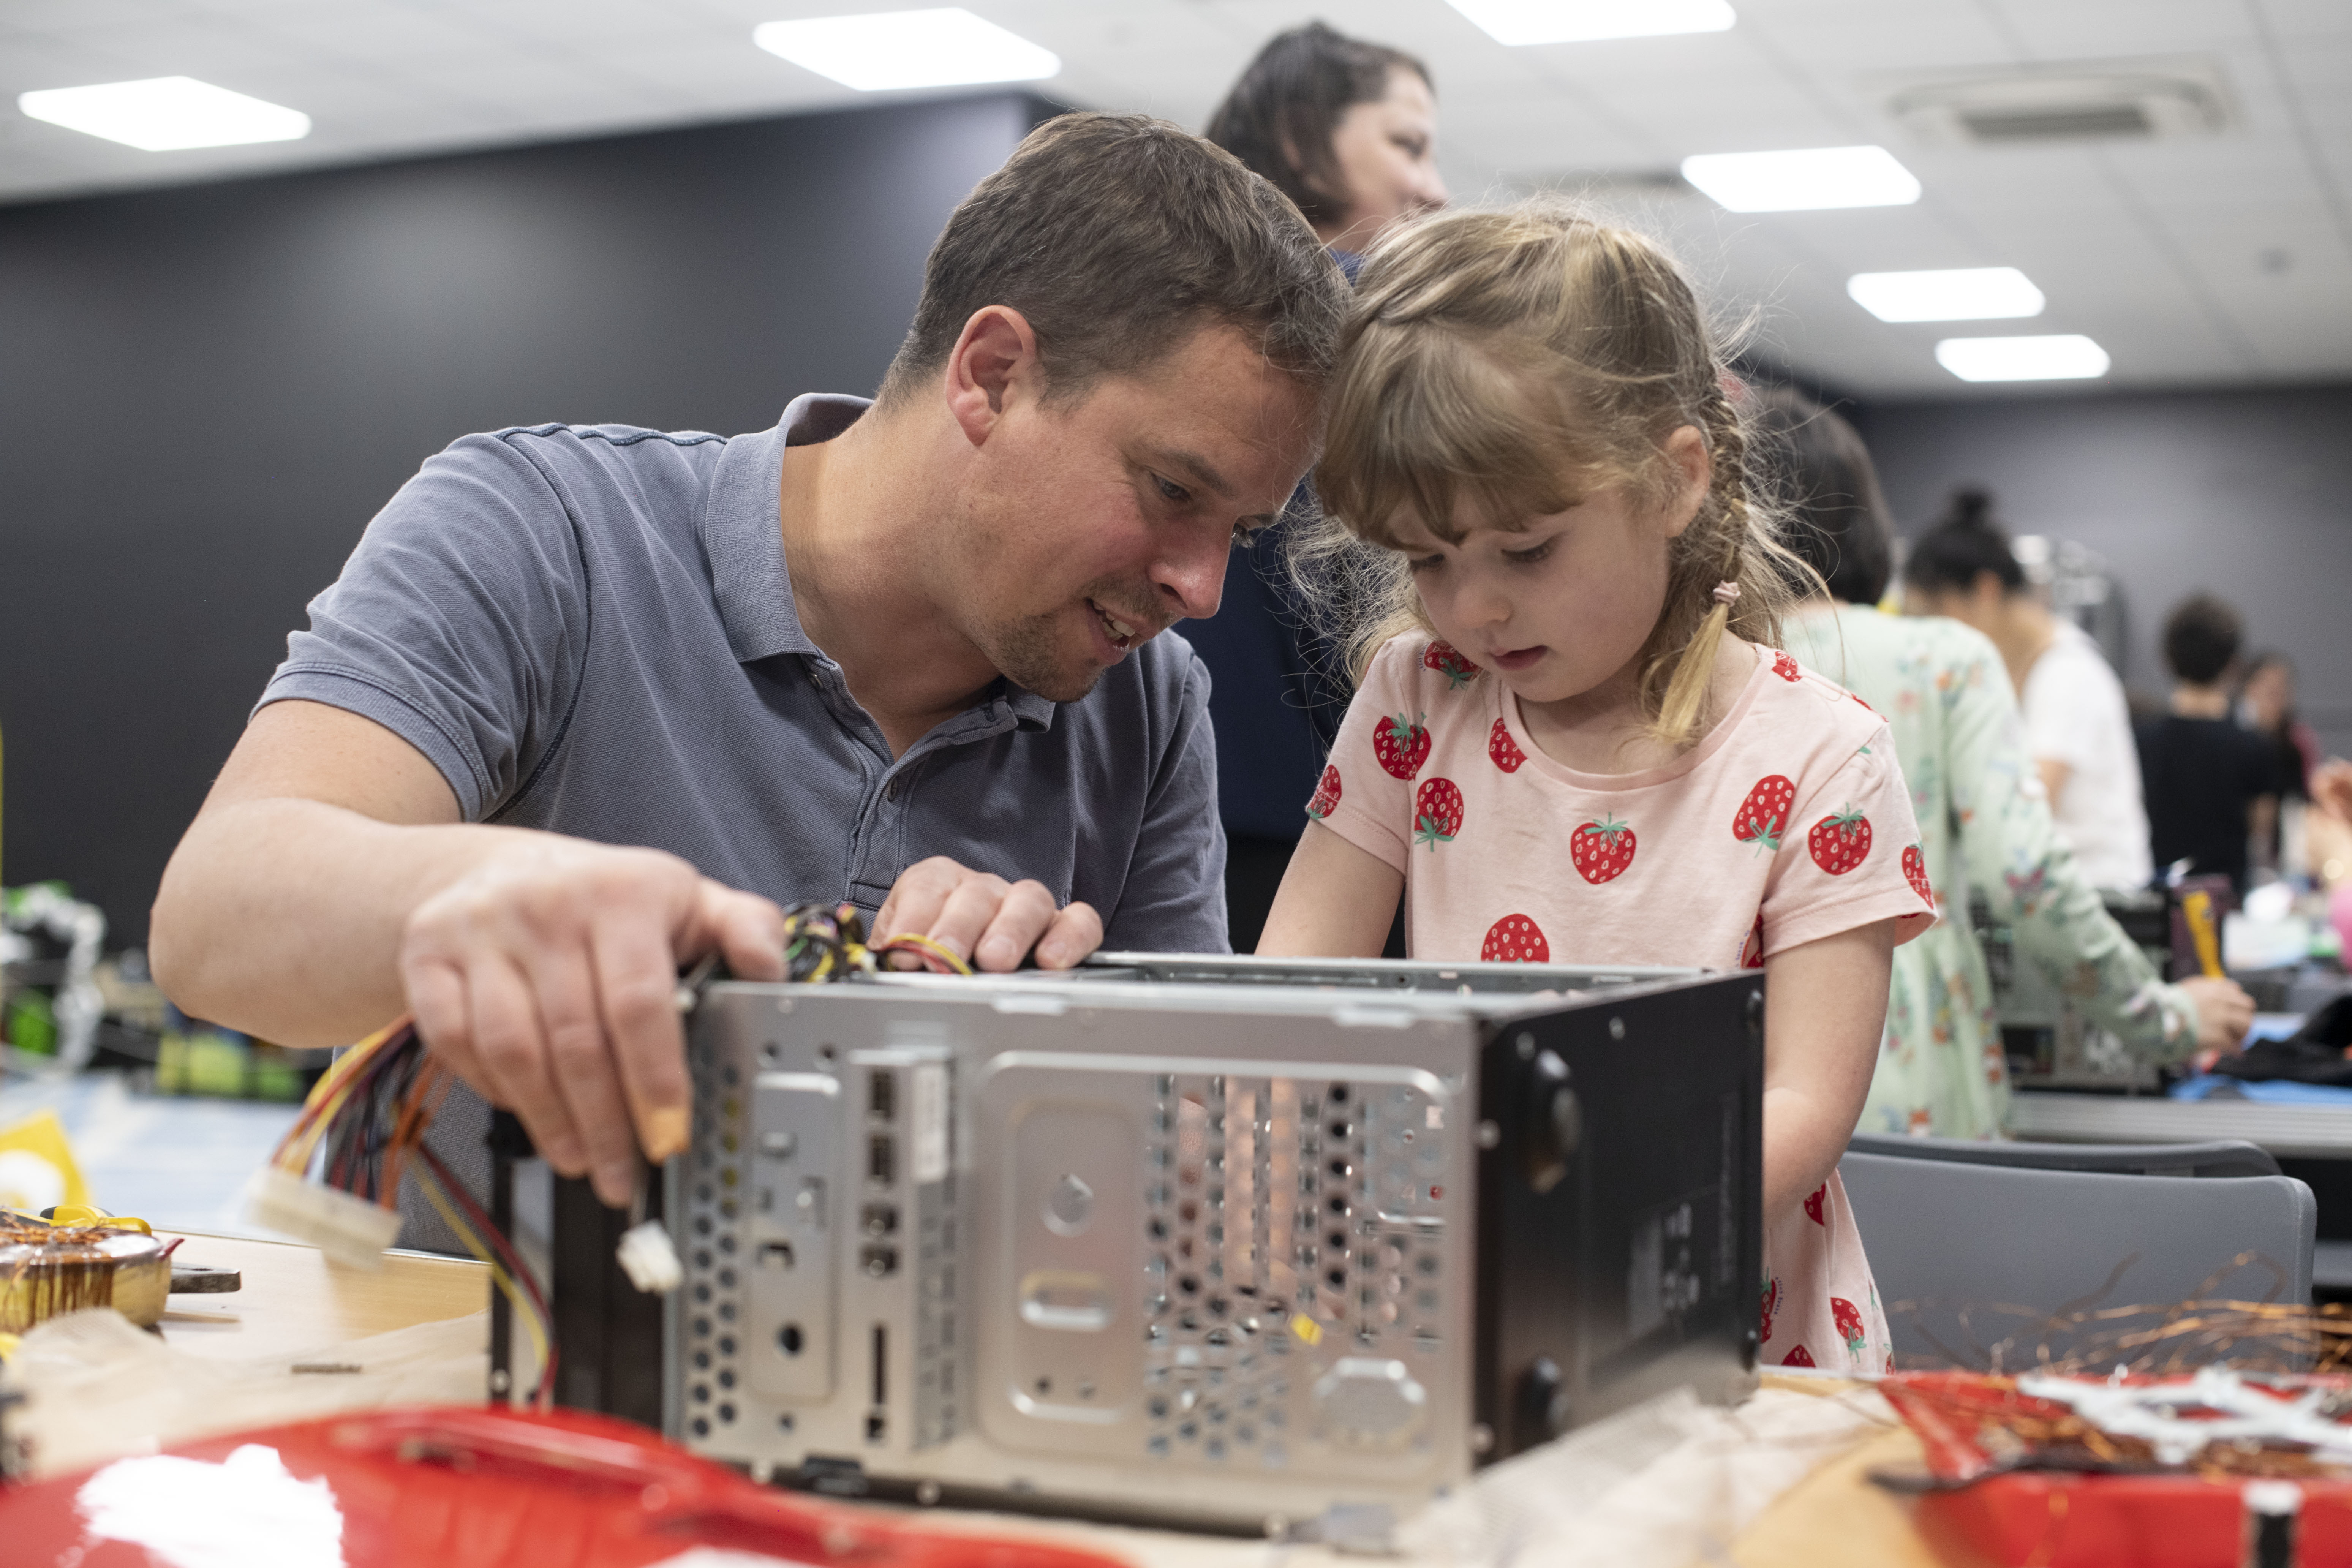 A man and a little girl working together to take apart an old computer